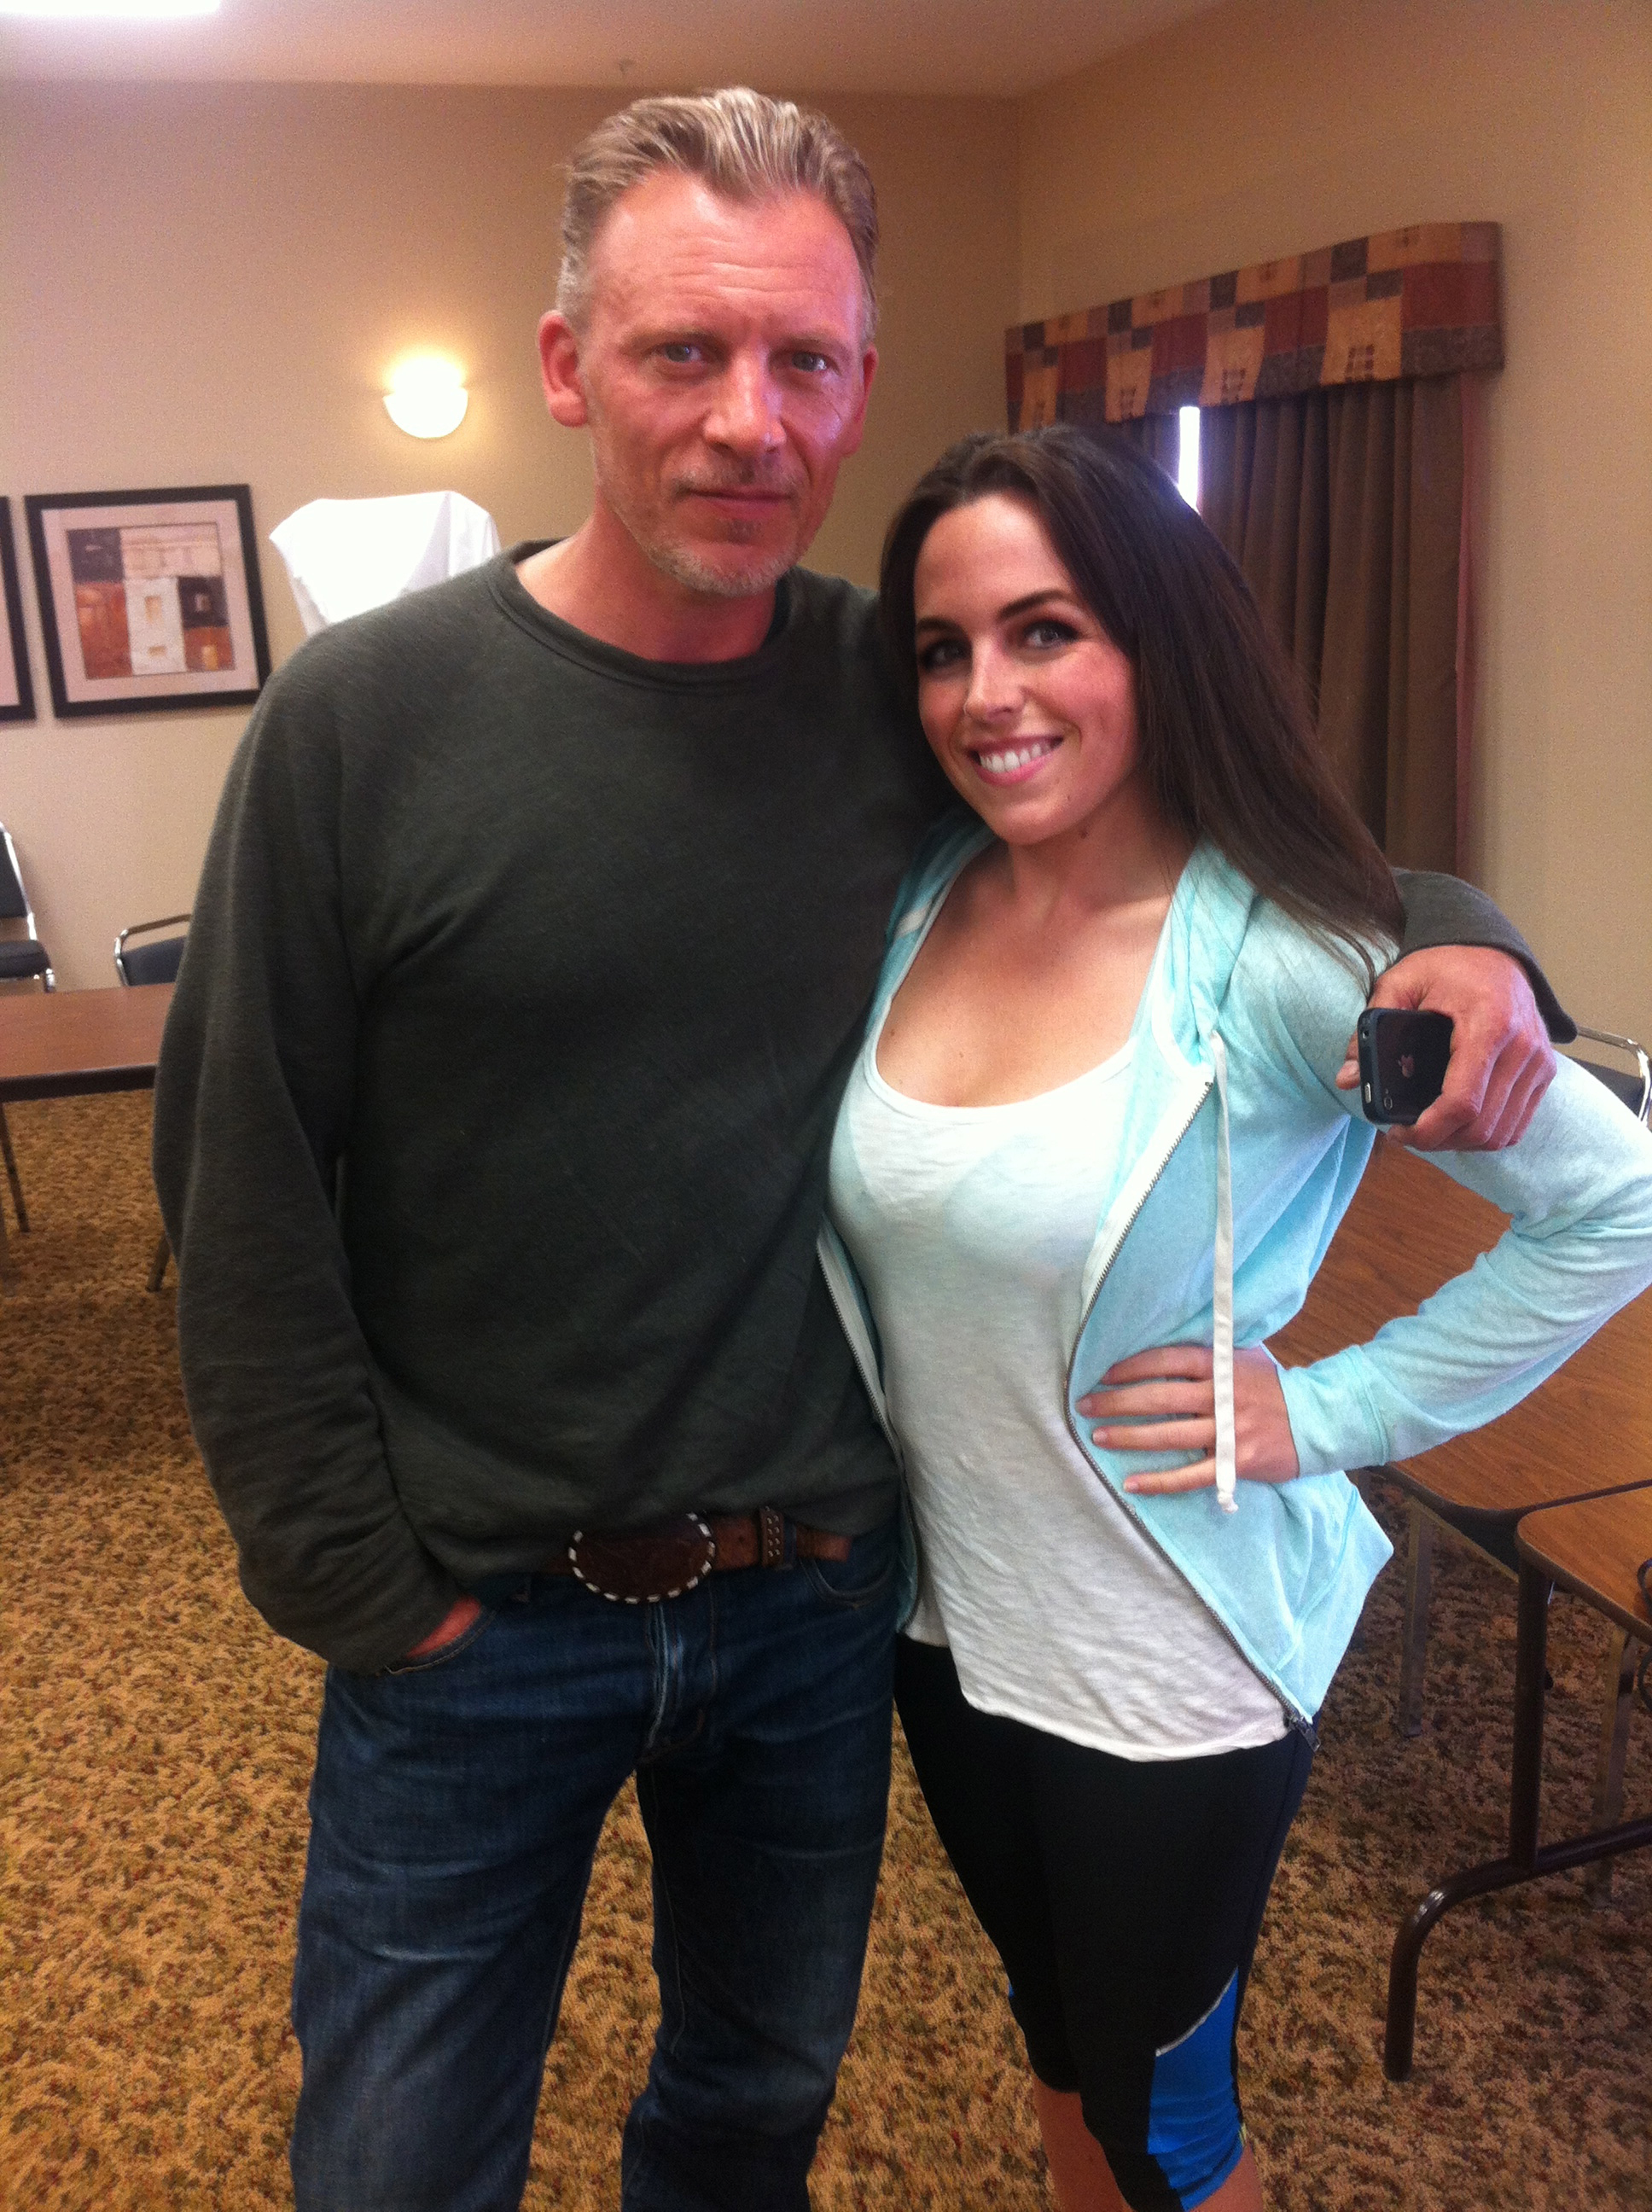 On location with Callum Keith Rennie 'The Young and Prodigious Spivet'